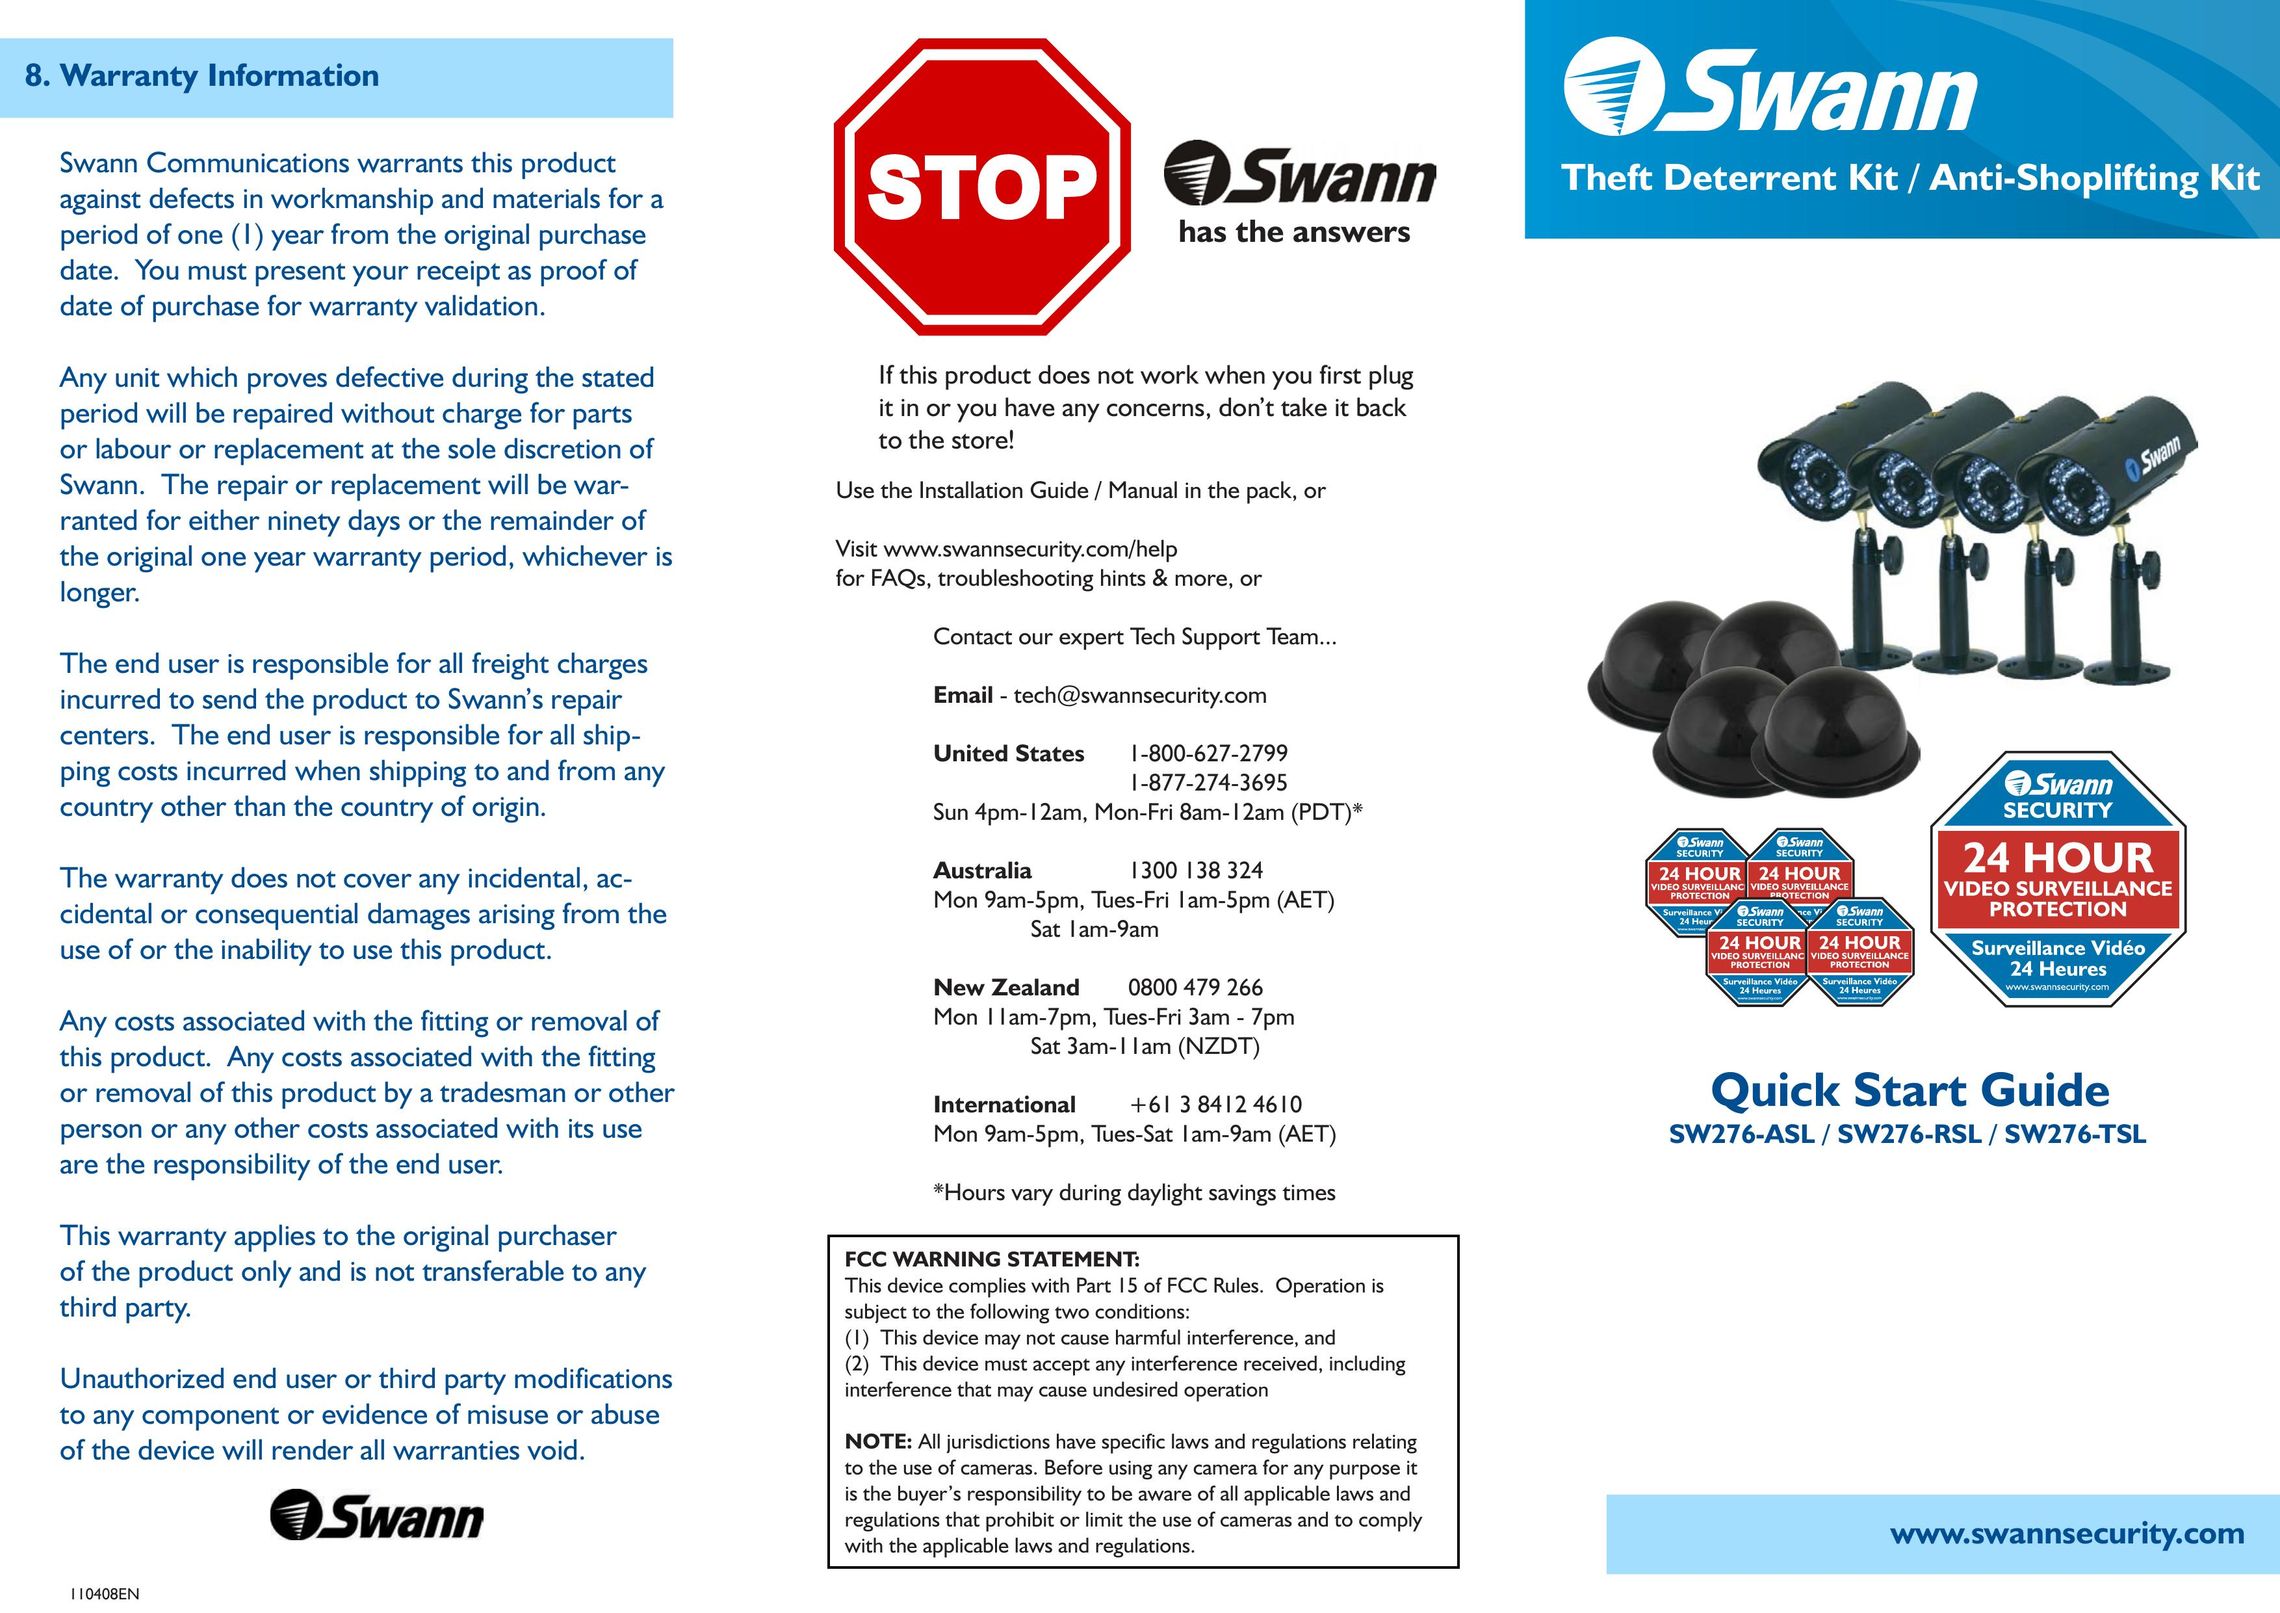 Swann SW276-RSL Home Security System User Manual